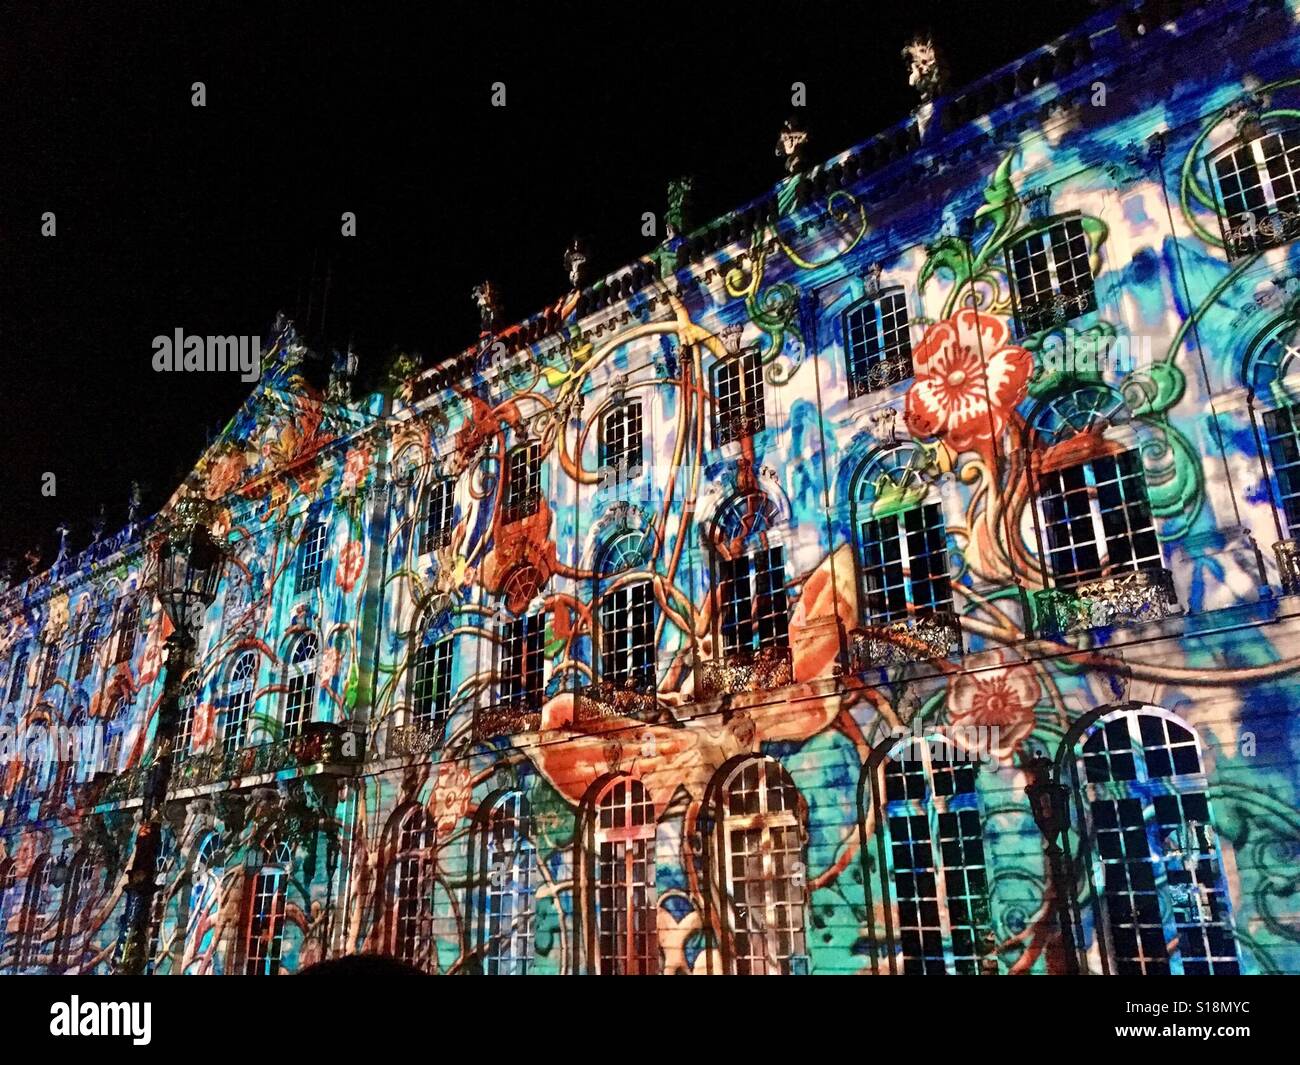 Projections on Place Stanislas, Nancy, France. August 2016. Stock Photo